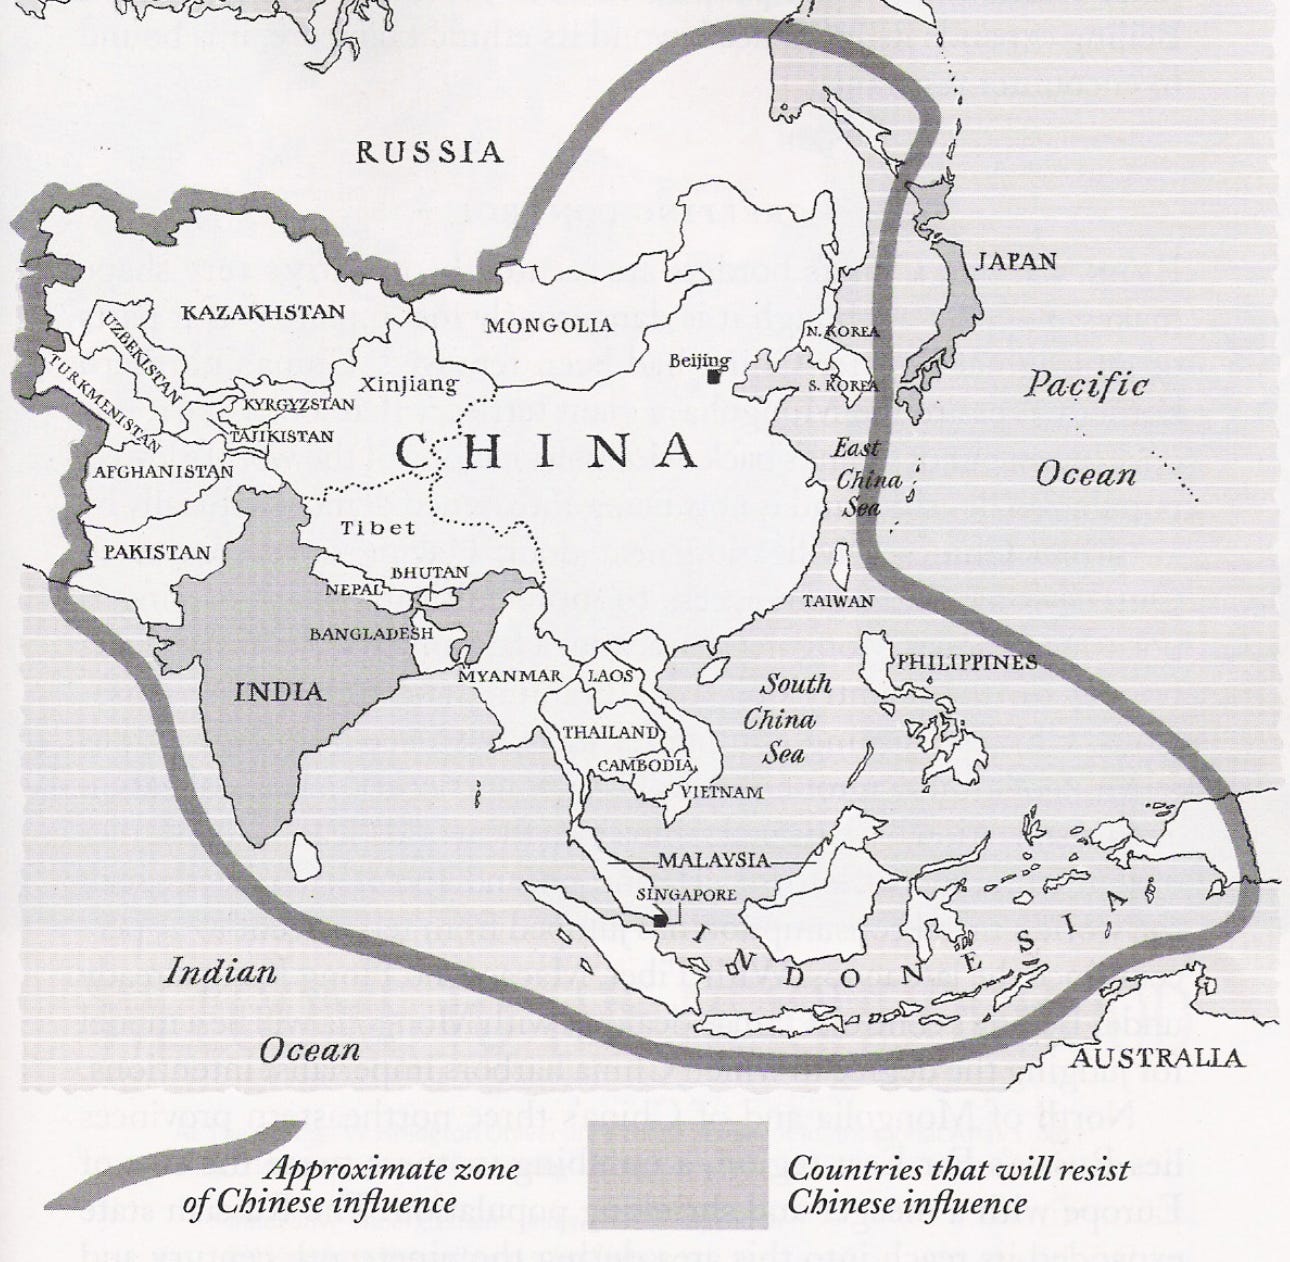 The Natural Zone of Chinese Influence